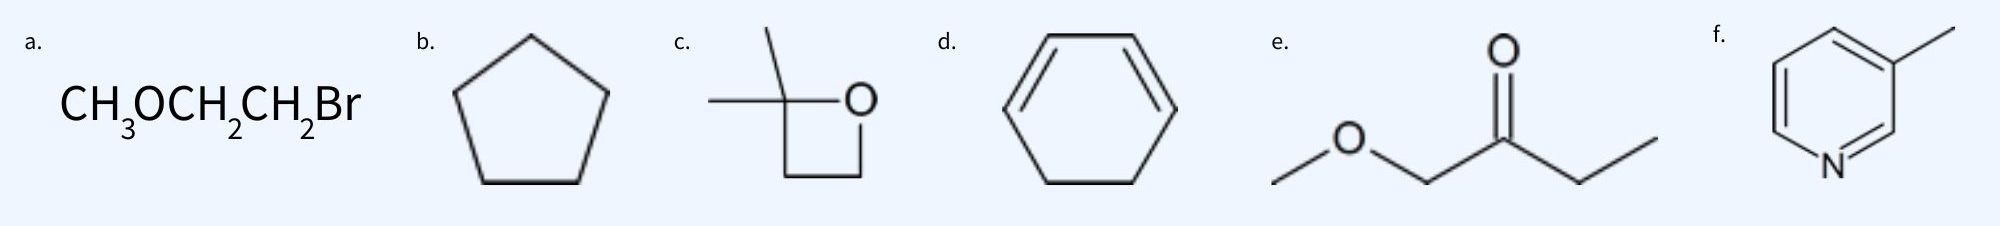 6 molecular structures a) to f) used to identify the number different hydrogen signals in each compound and list the number of hydrogen atoms making each signal. a) CH3OCH2CH2Br b) cyclopentane c) d) 1,3-cyclohexadiene e) CH3OCH2COCH2CH3 f)